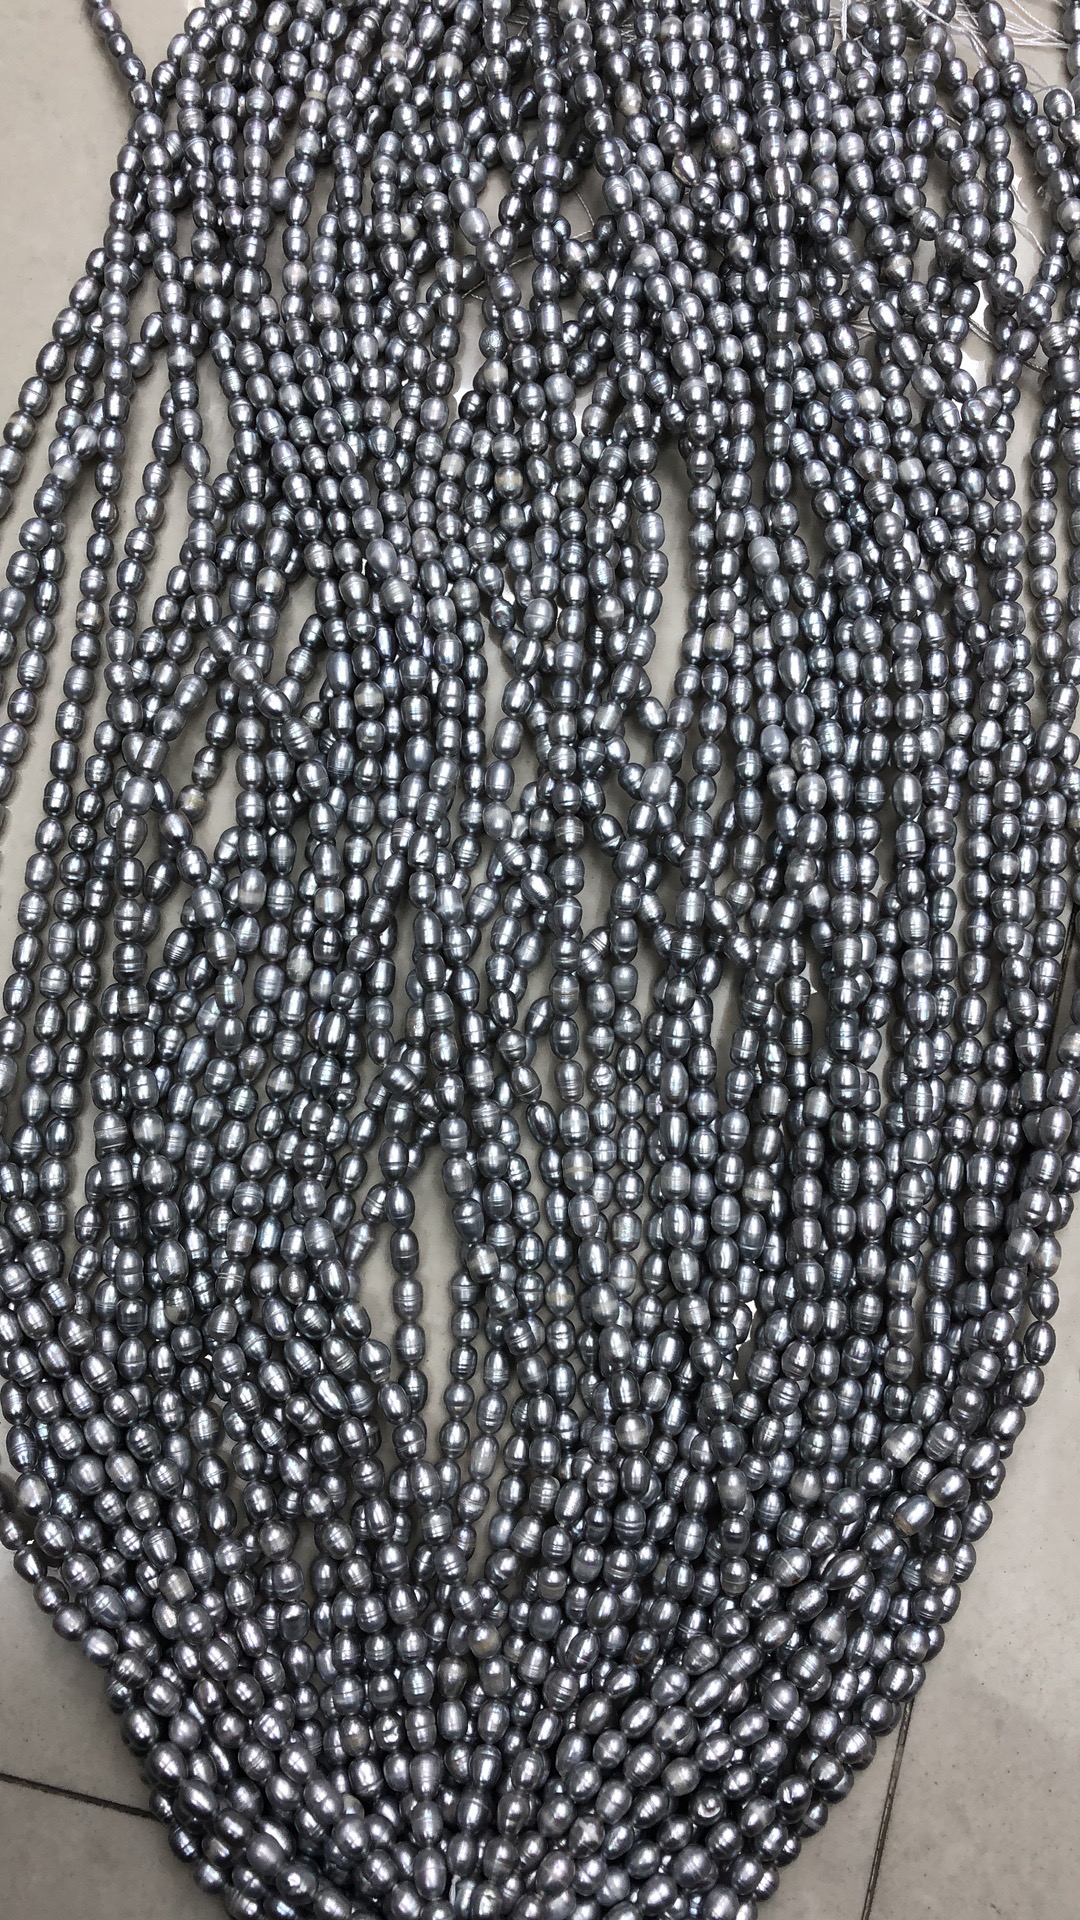 5 mm rice shape freshwater pearls wholesale single color loose wholesale freshwater pearl in strand -37 cm